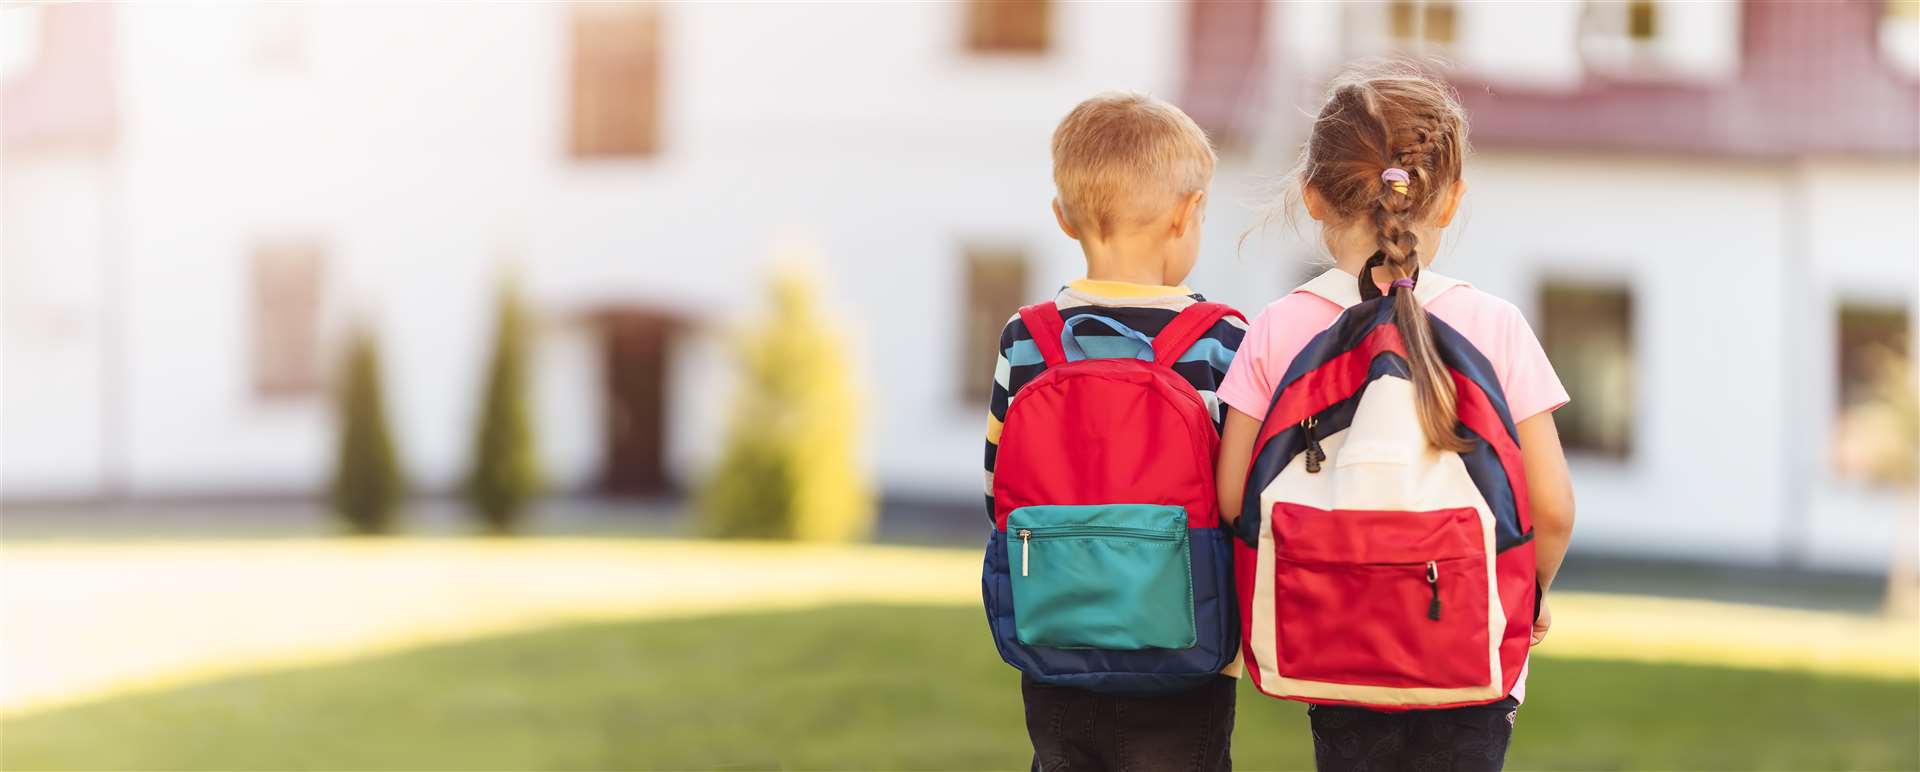 The school-age payment can help buy school bags and materials.